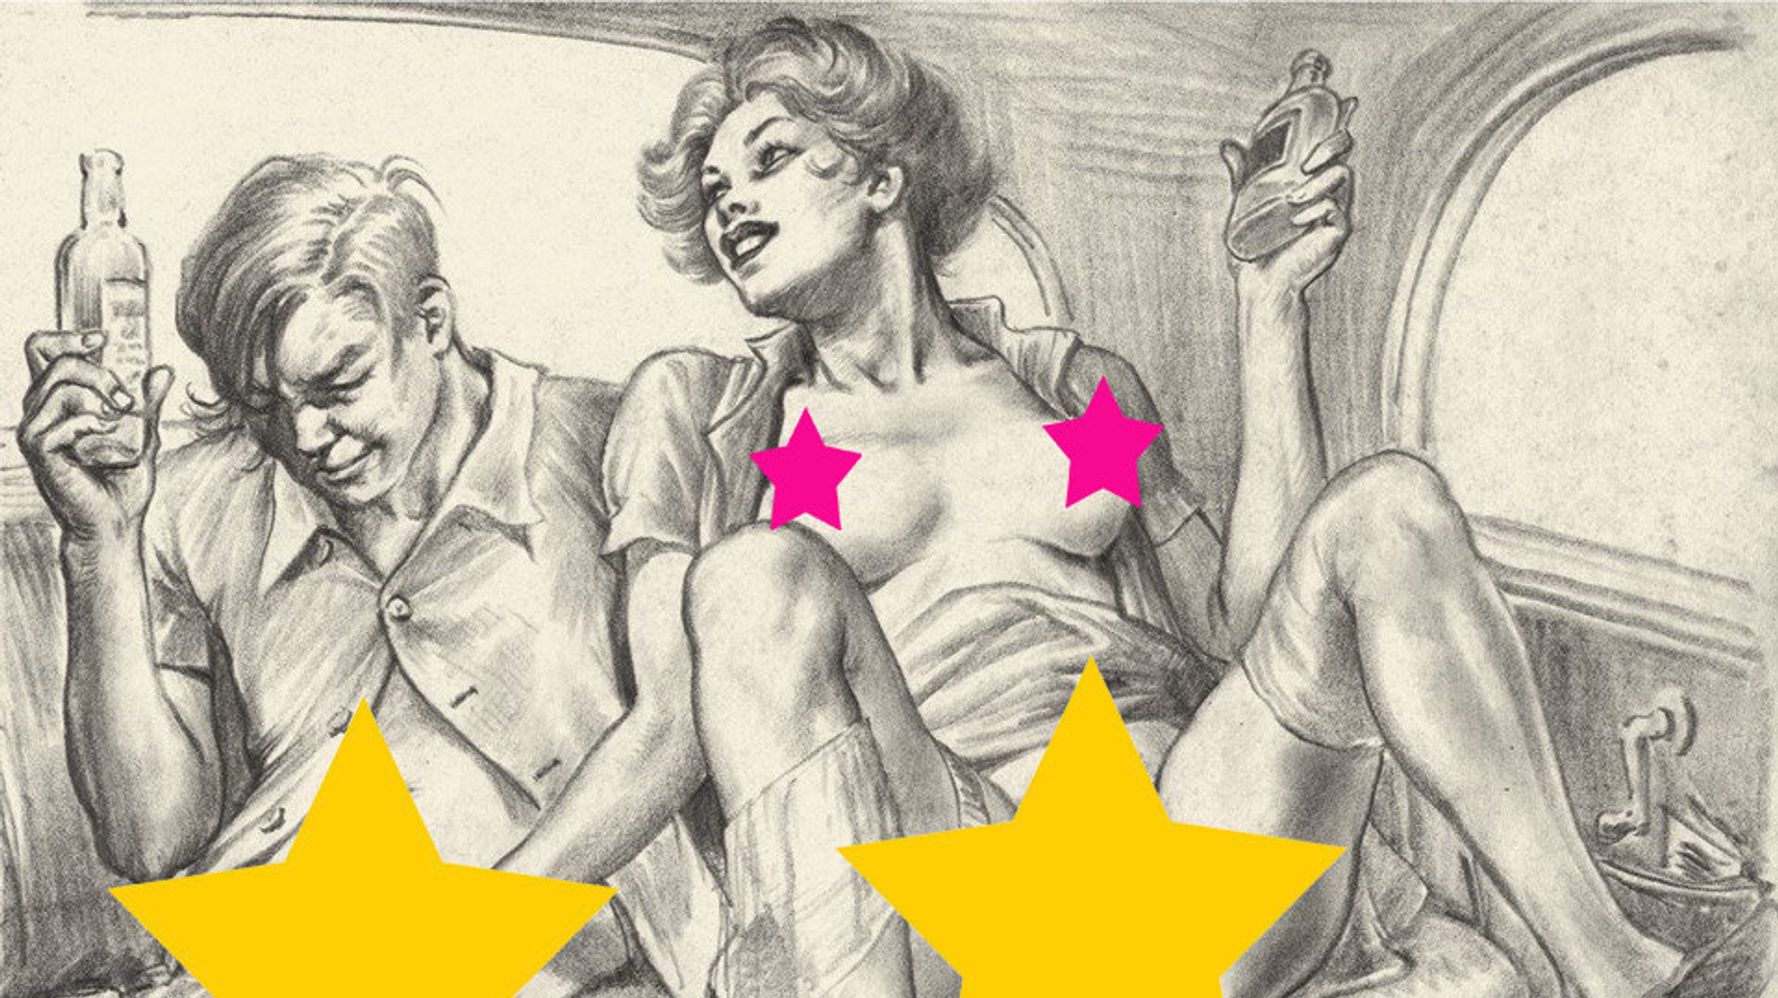 Sexy Women From The 1940s - The Strange Case Of Thomas Poulton, An Erotic Artist In The 1940s (NSFW) |  HuffPost Entertainment